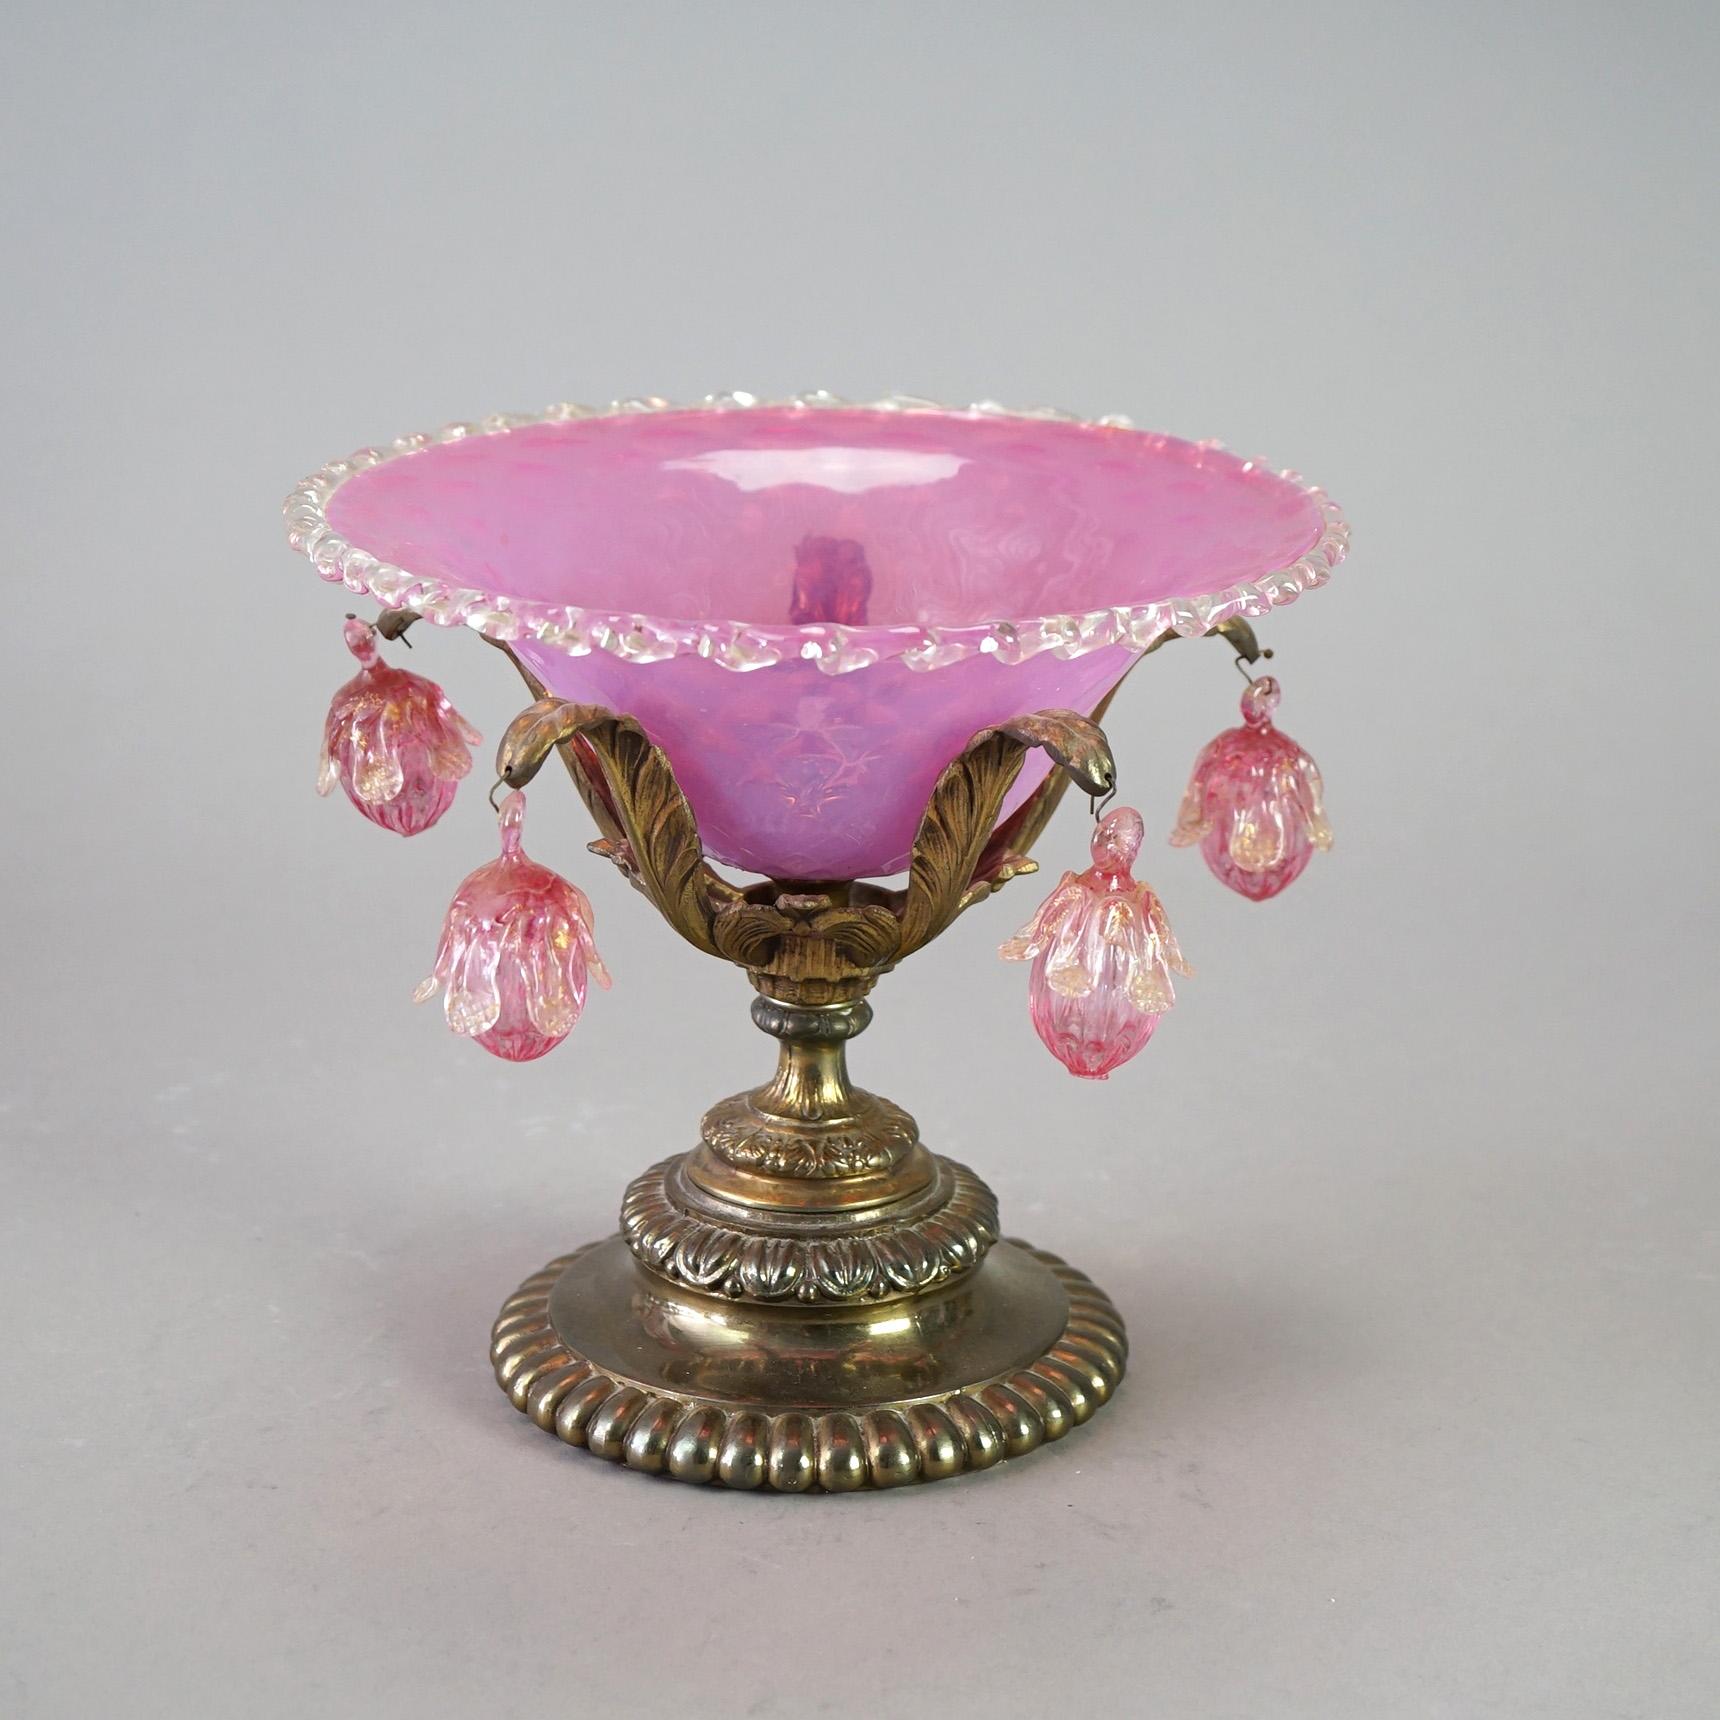 Italian Antique Venetian Murano Pink Glass Compote with Blown Glass Ornaments C1890